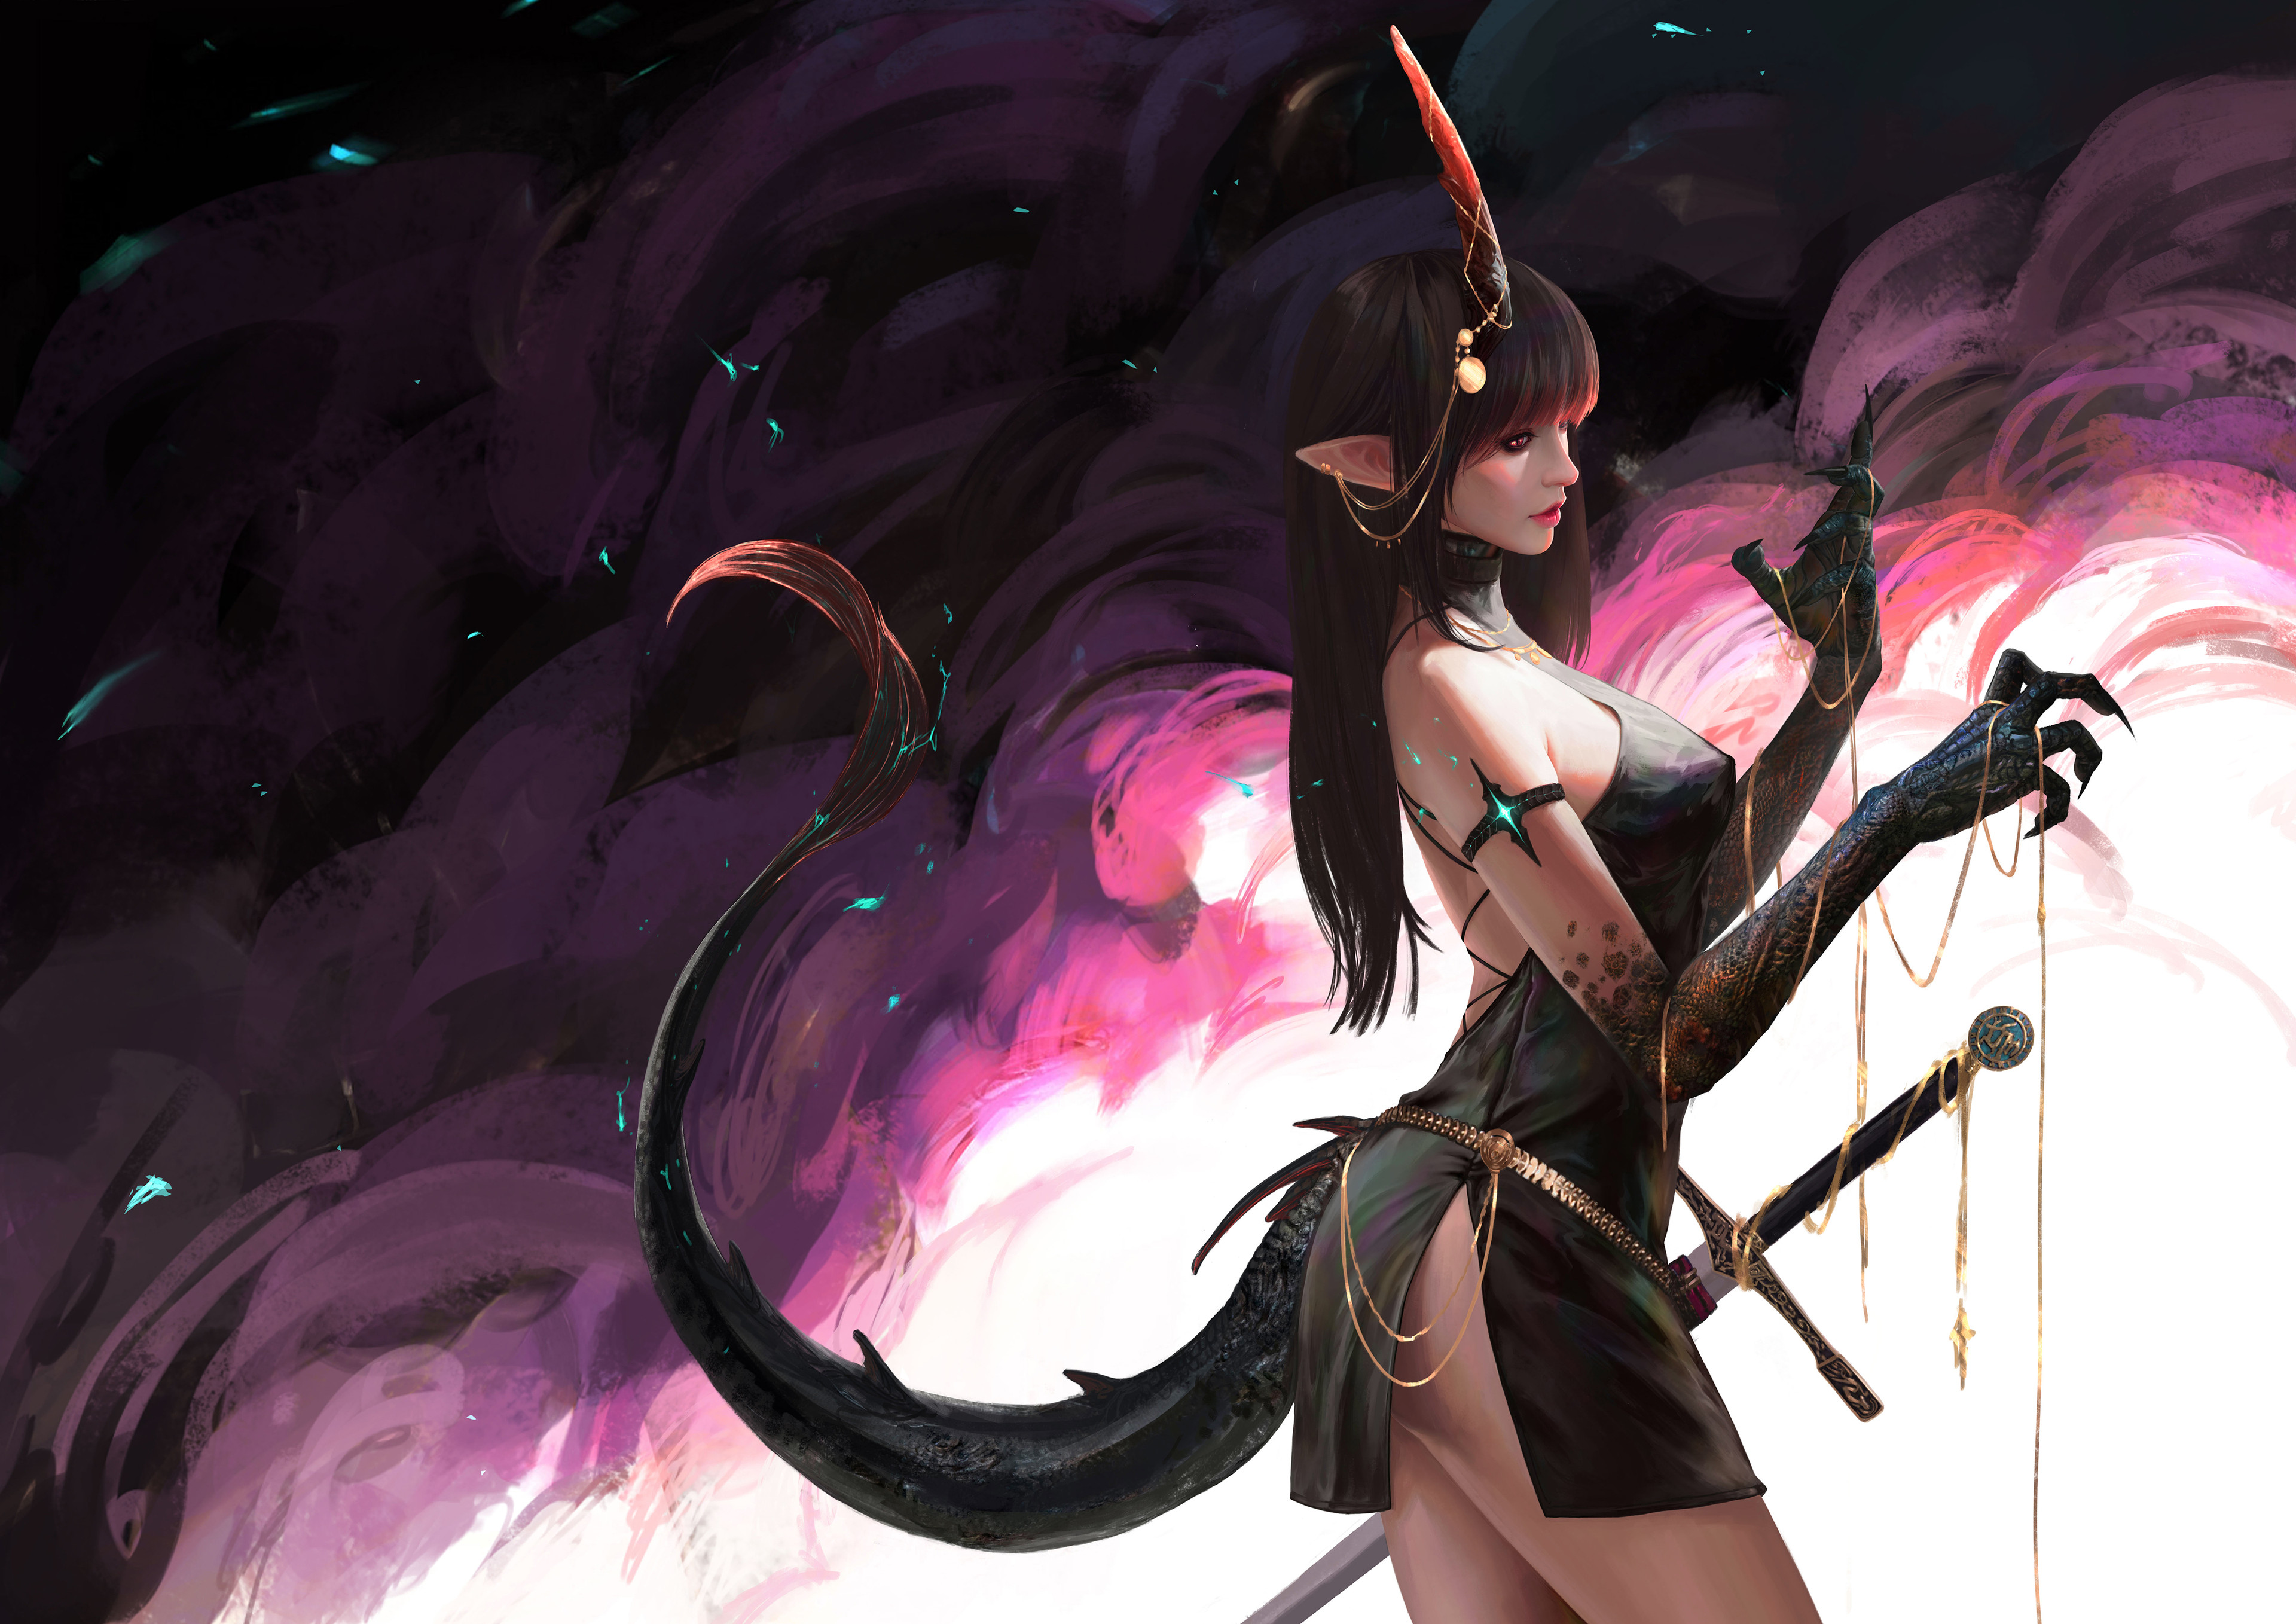 General 3840x2716 women artwork fantasy art fantasy girl pointy ears tail creature claws thighs brunette long hair women with swords sword girls with guns